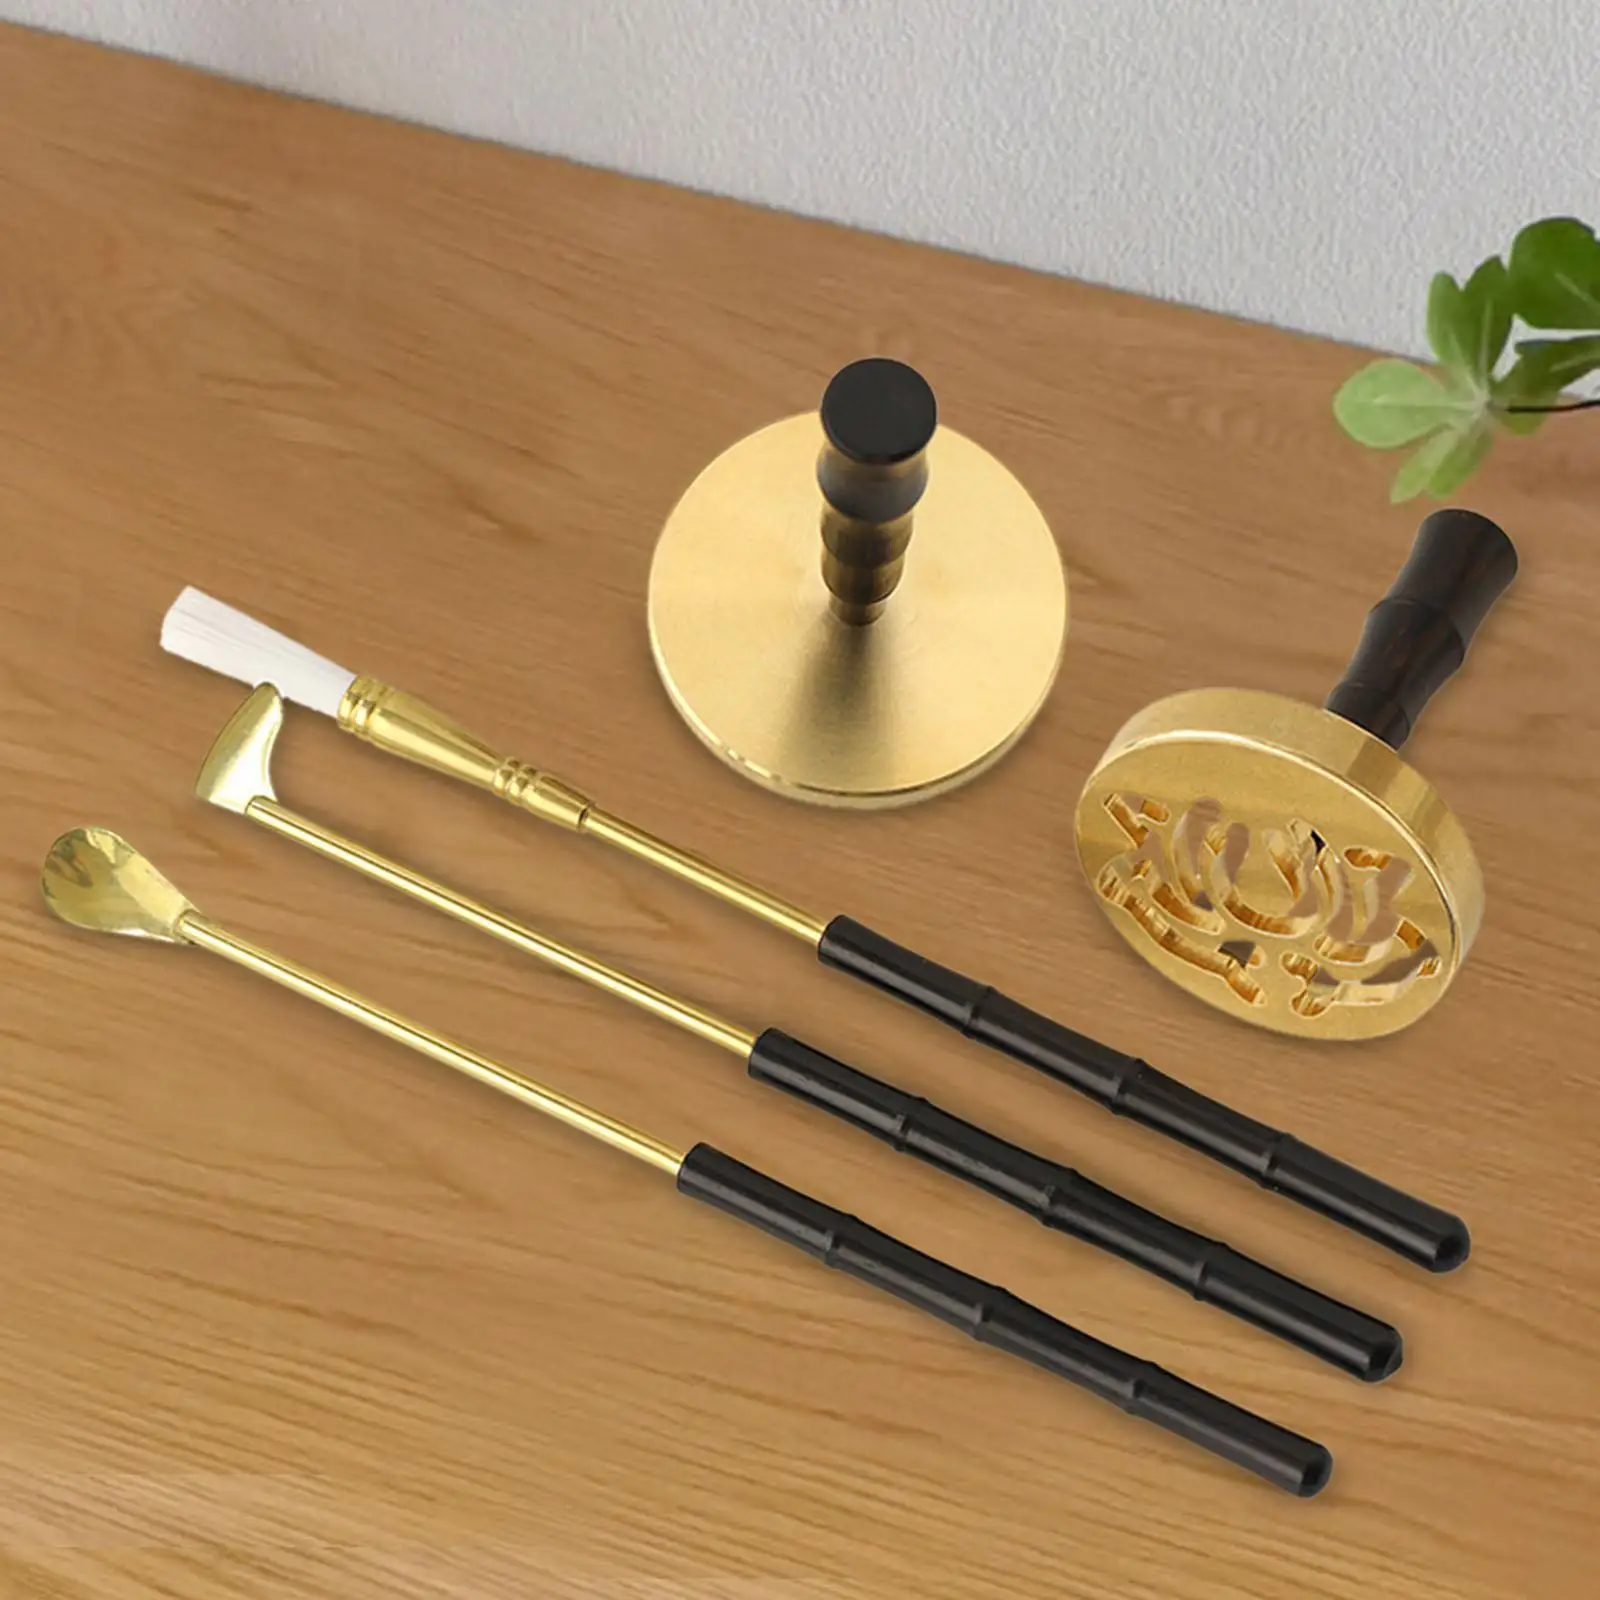 5 Pieces Incense Tool Set Censer Tool Incense Making Spoon for Office Home Supplies